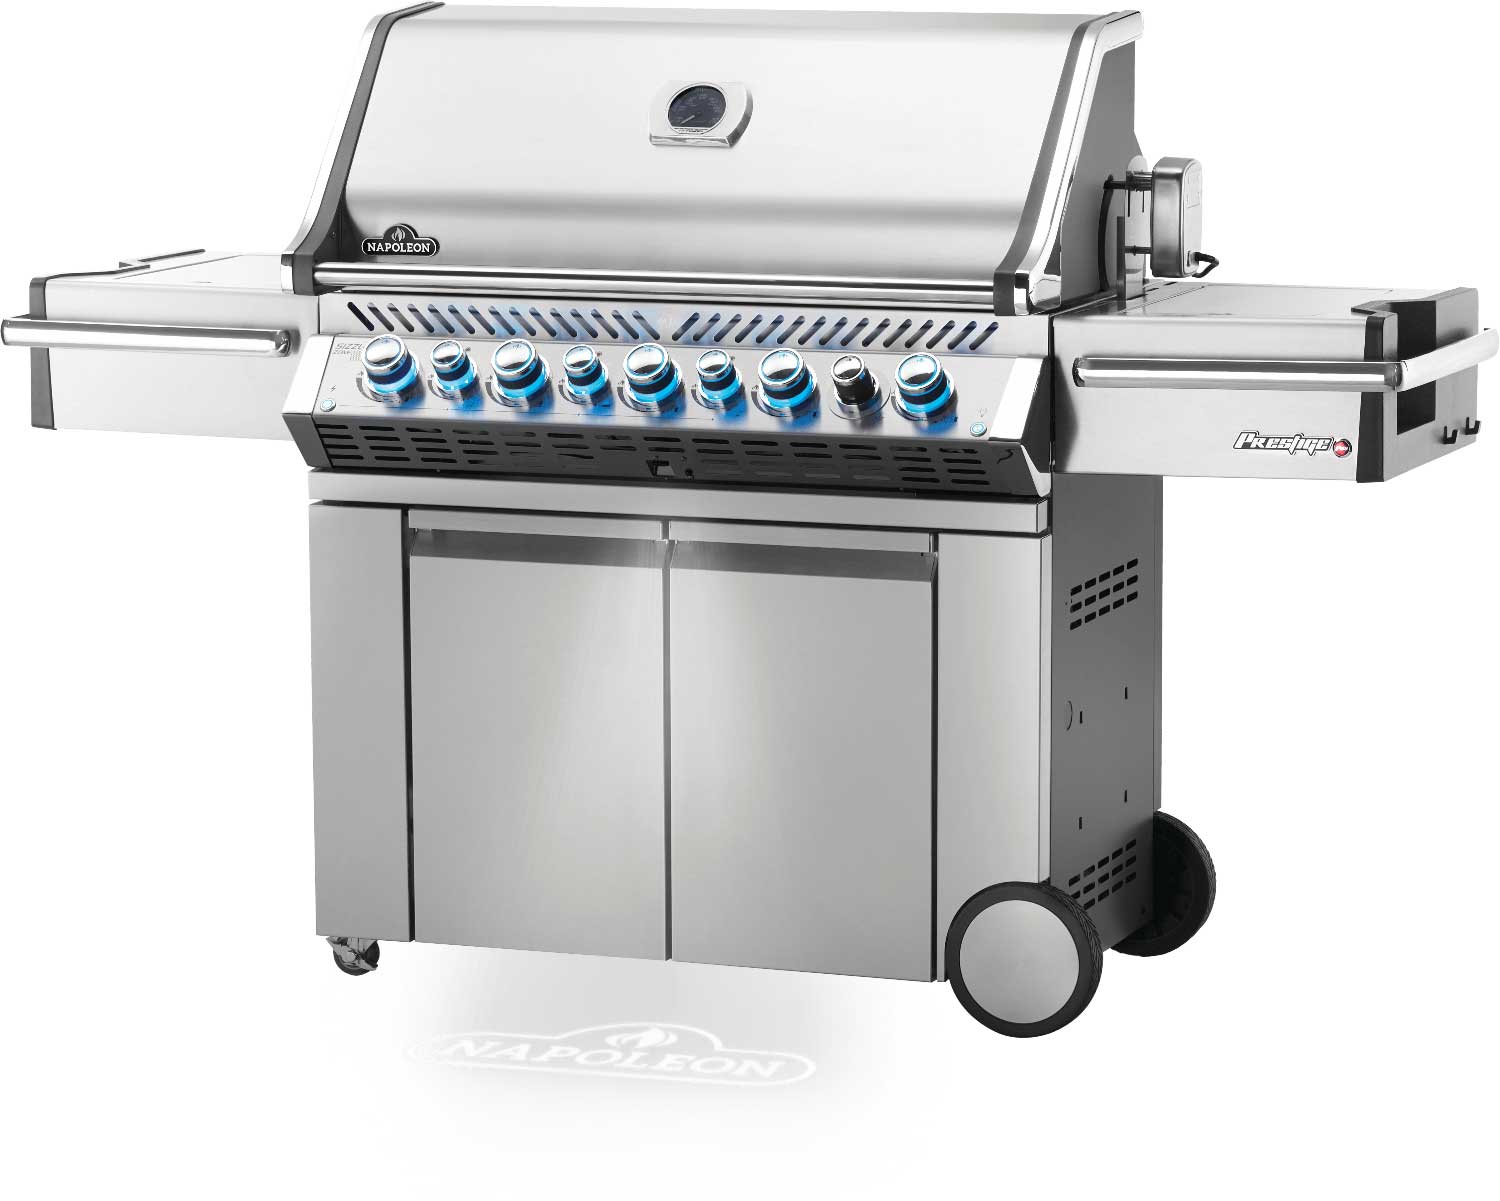 Napoleon Grills Prestige PRO 665 Gas Grill with Infrared Side and Rear Burners, Stainless Steel Outdoor Grills